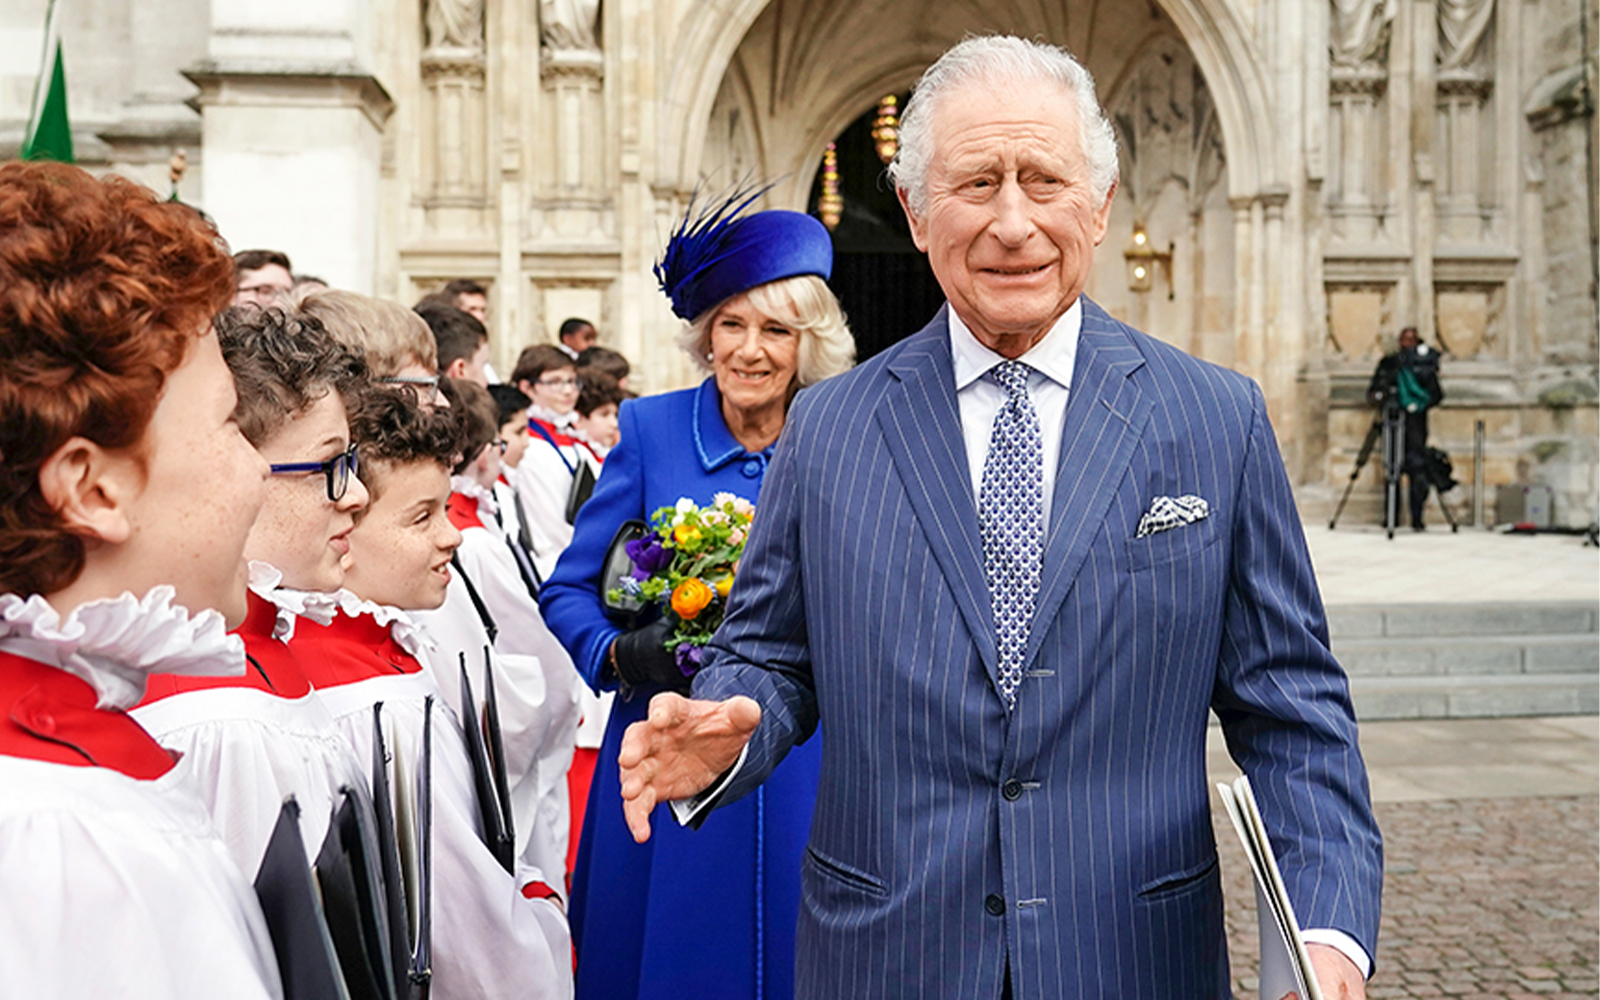 The Royal Family turned out in full force for King Charles’ first Commonwealth Day